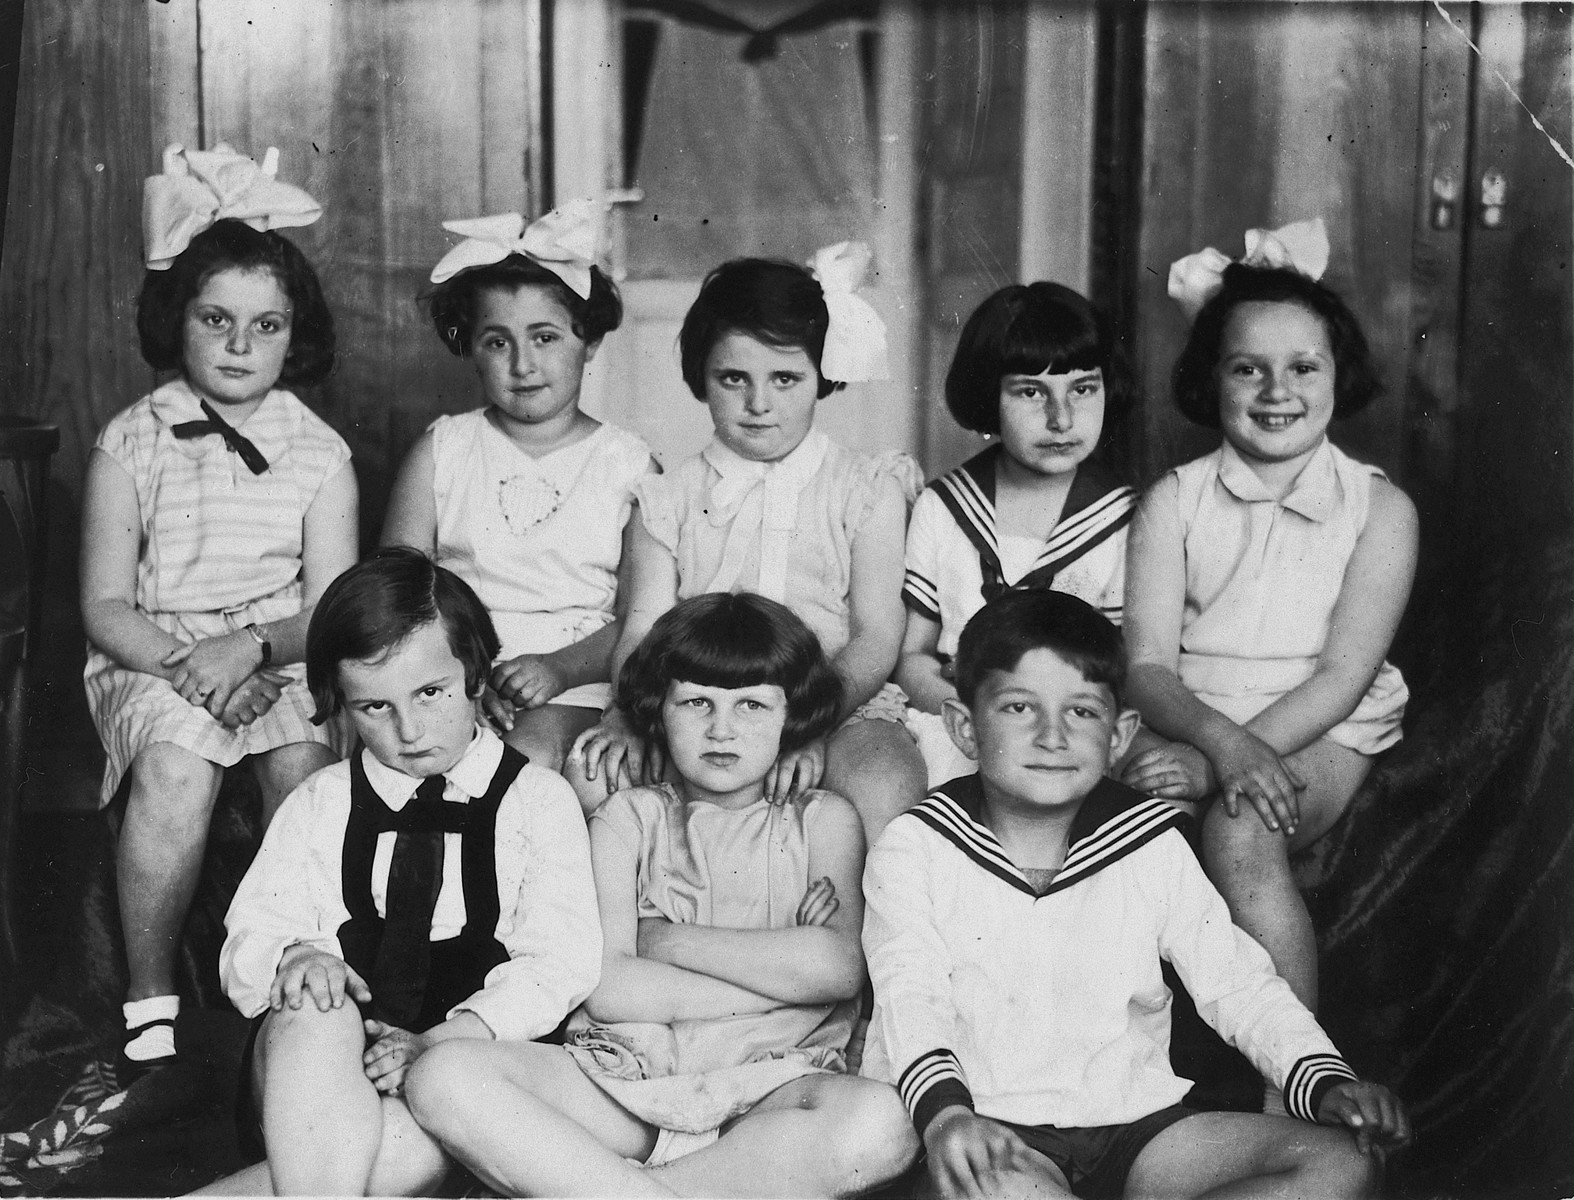 Sophie Kimelman poses for a group portrait with her closest friends.

Sophie is pictured in the top row, center.